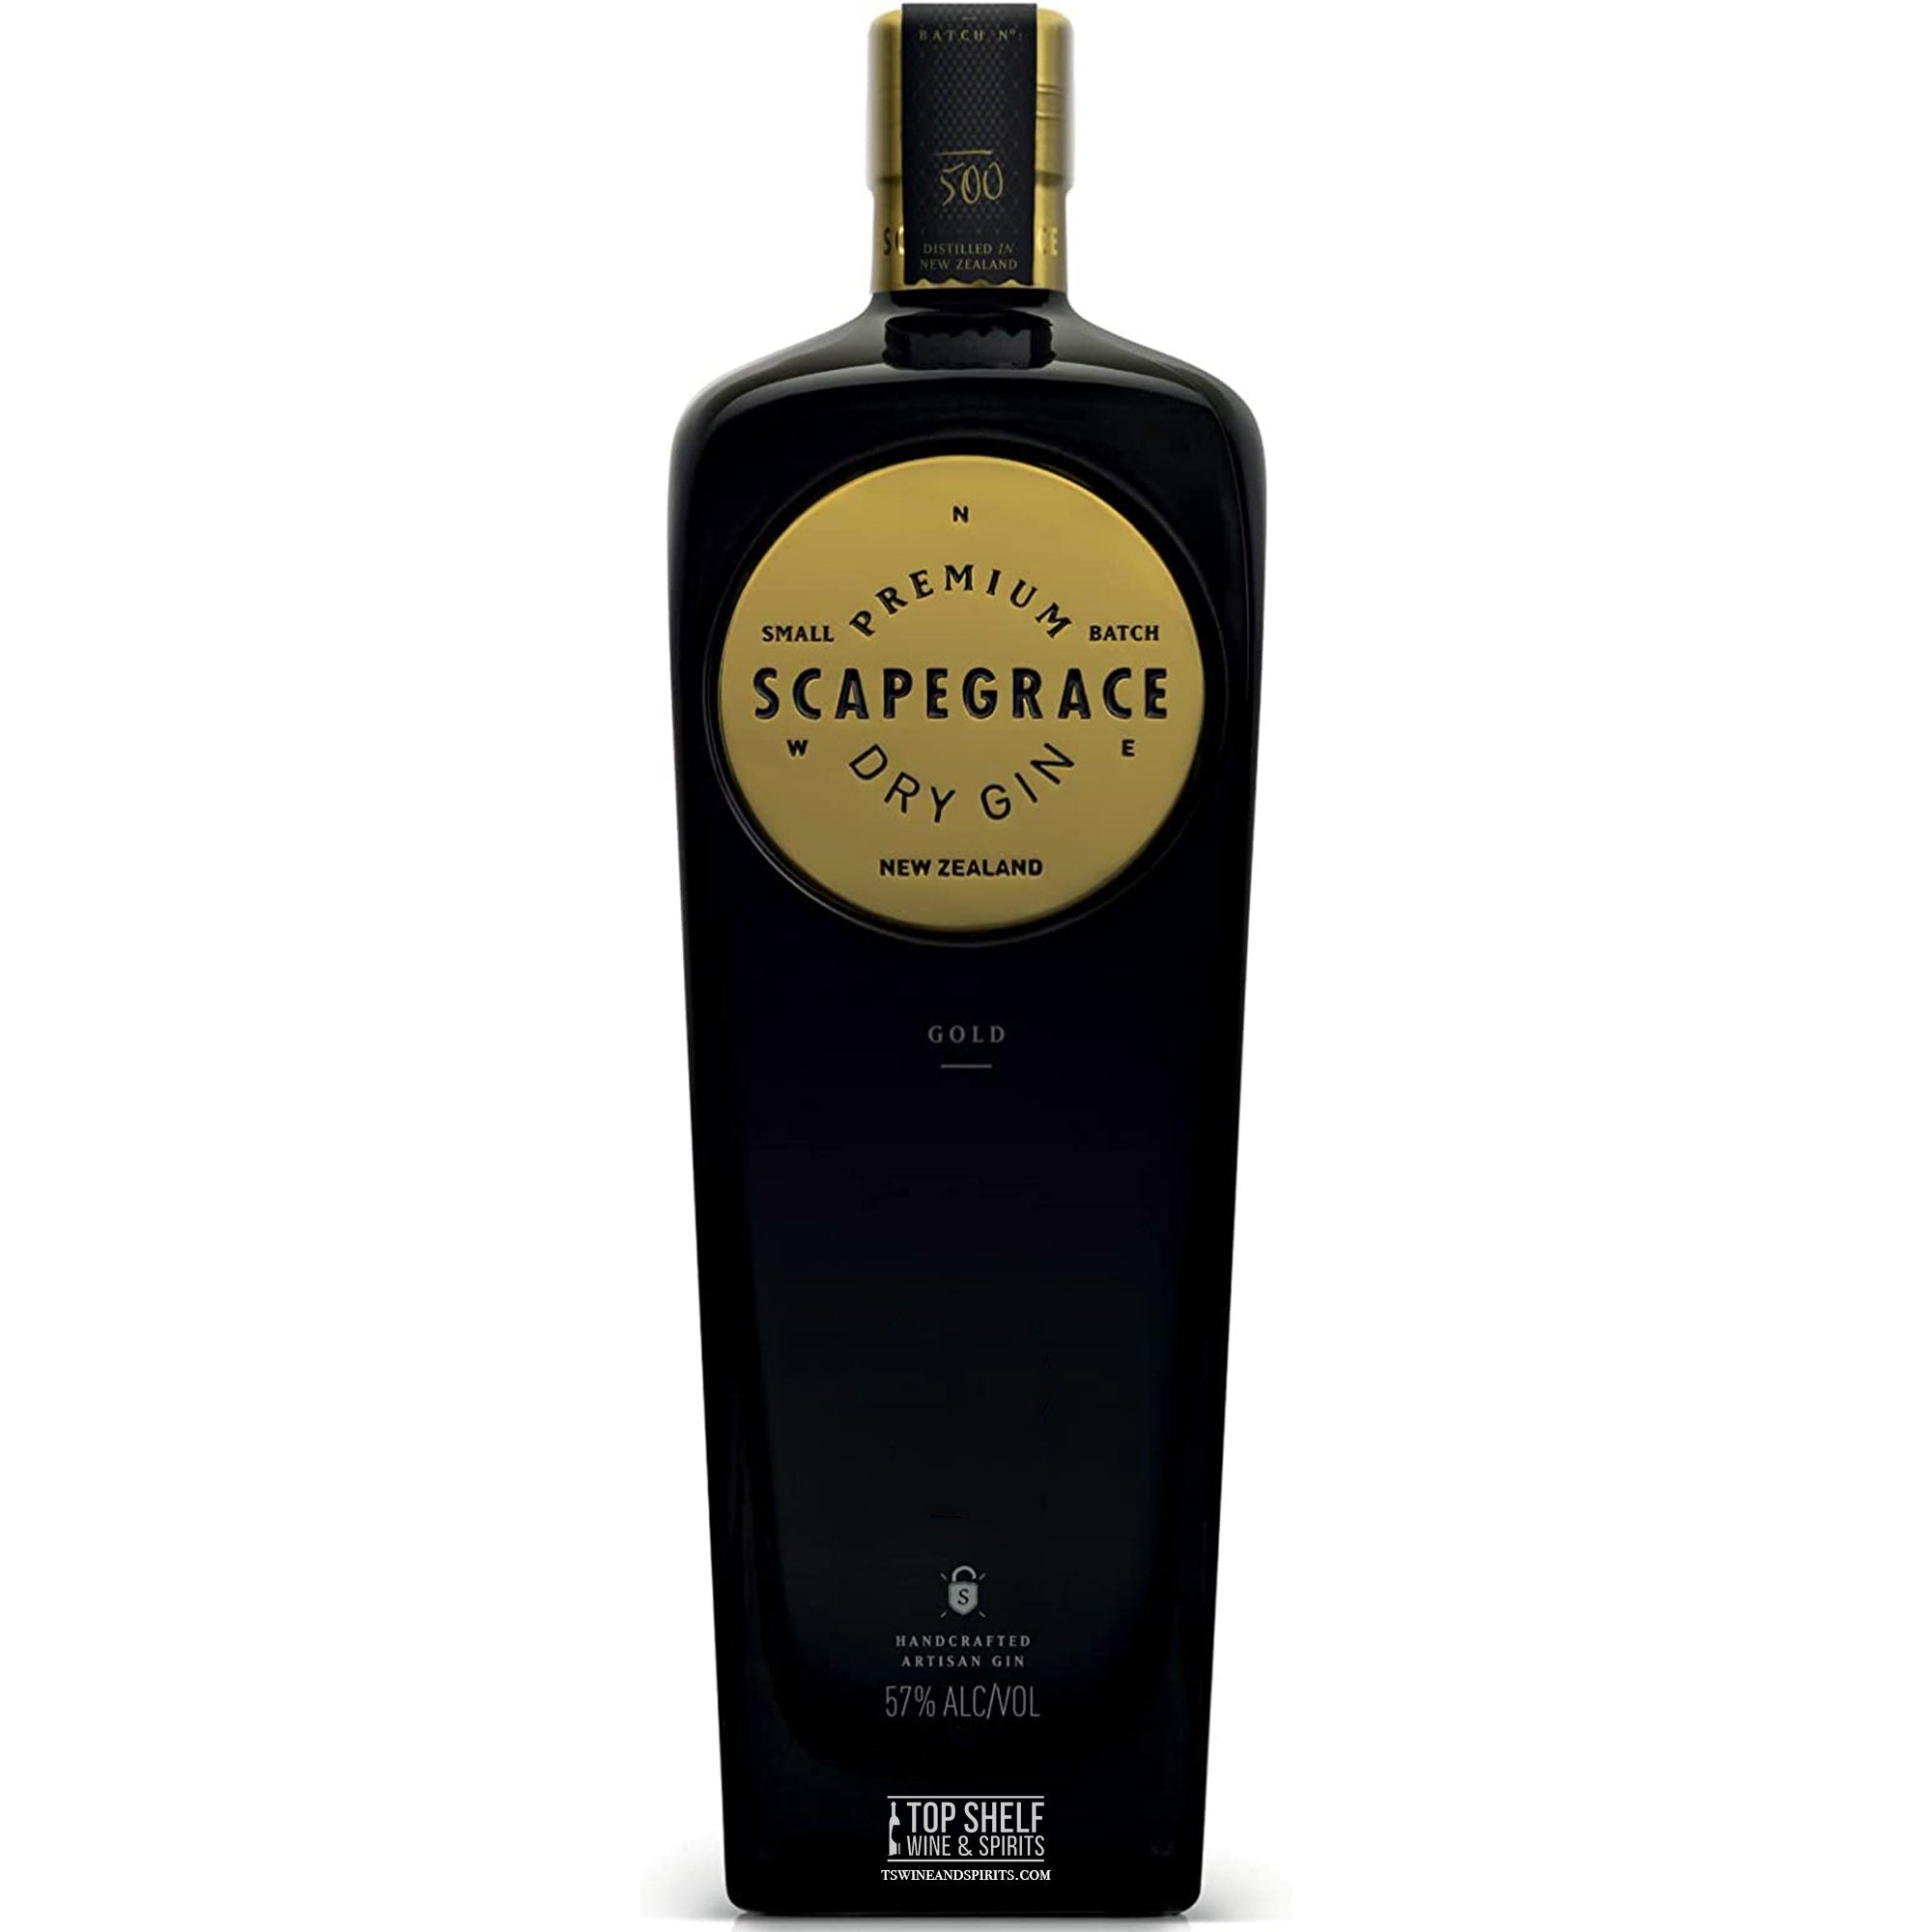 Scapegrace Dry Gin New Zealand (Gold)